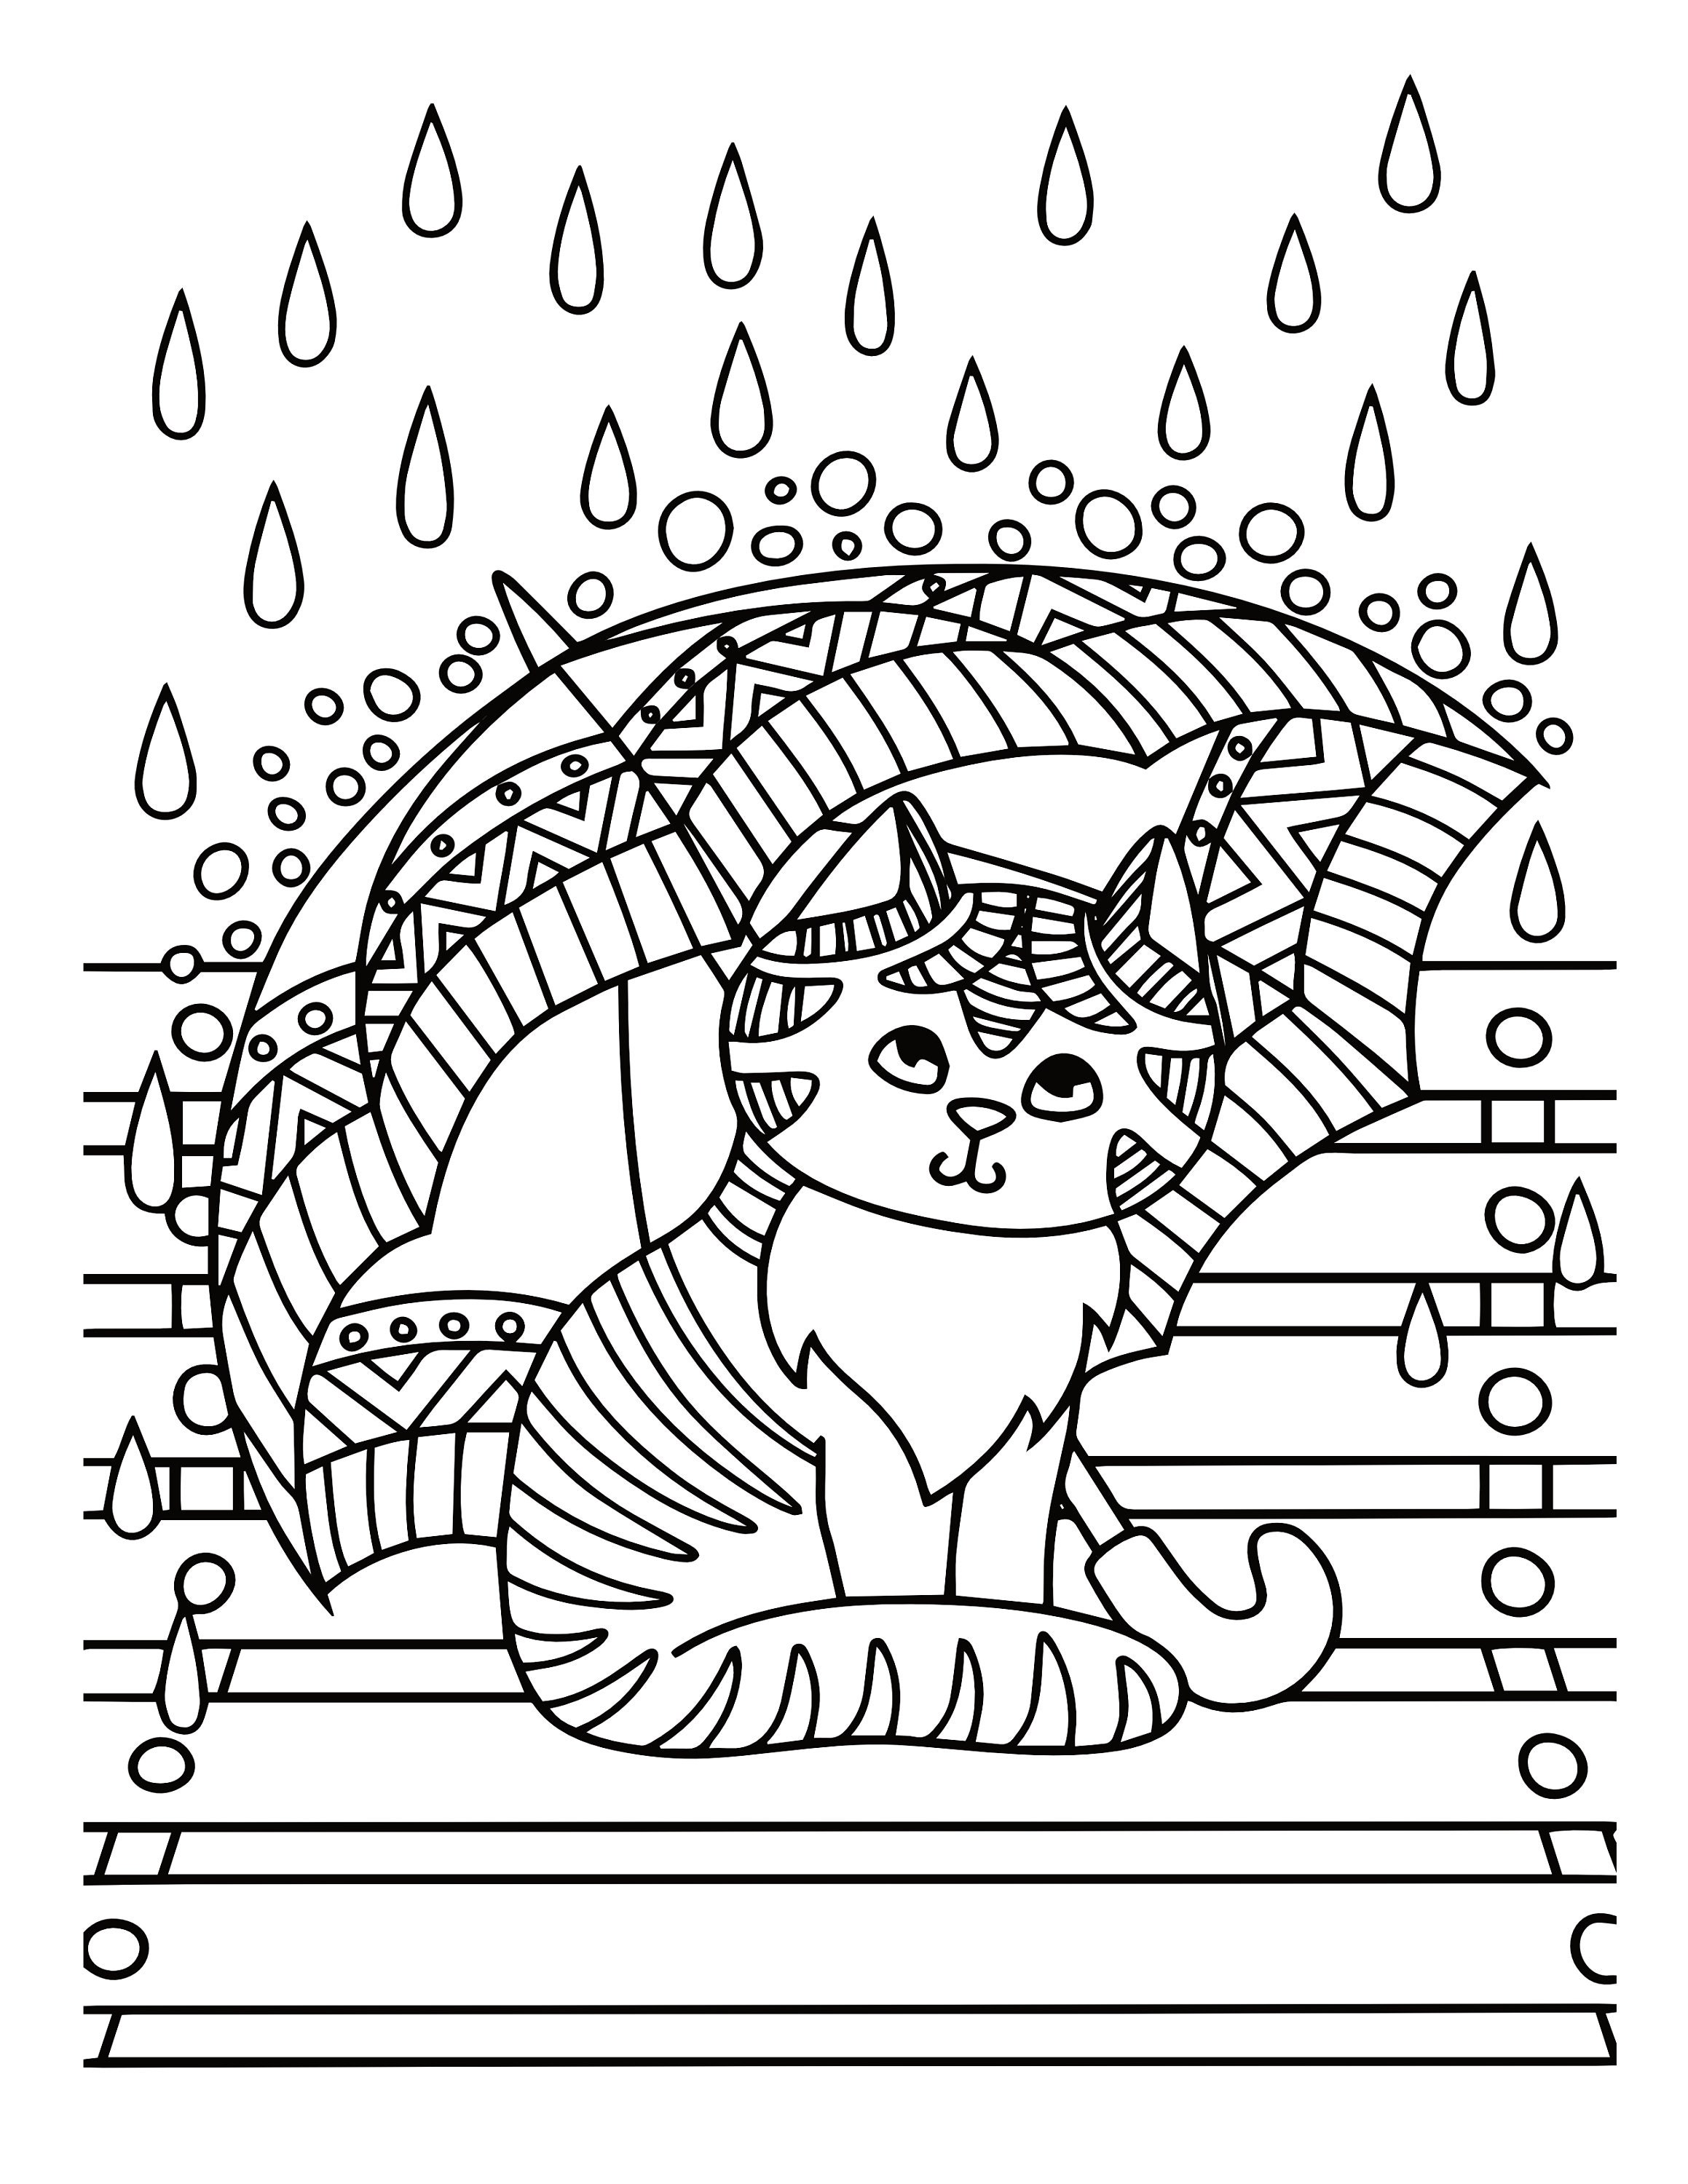 Kitten Coloring Pages 21 Printable Kitten Coloring Pages for , Etsy